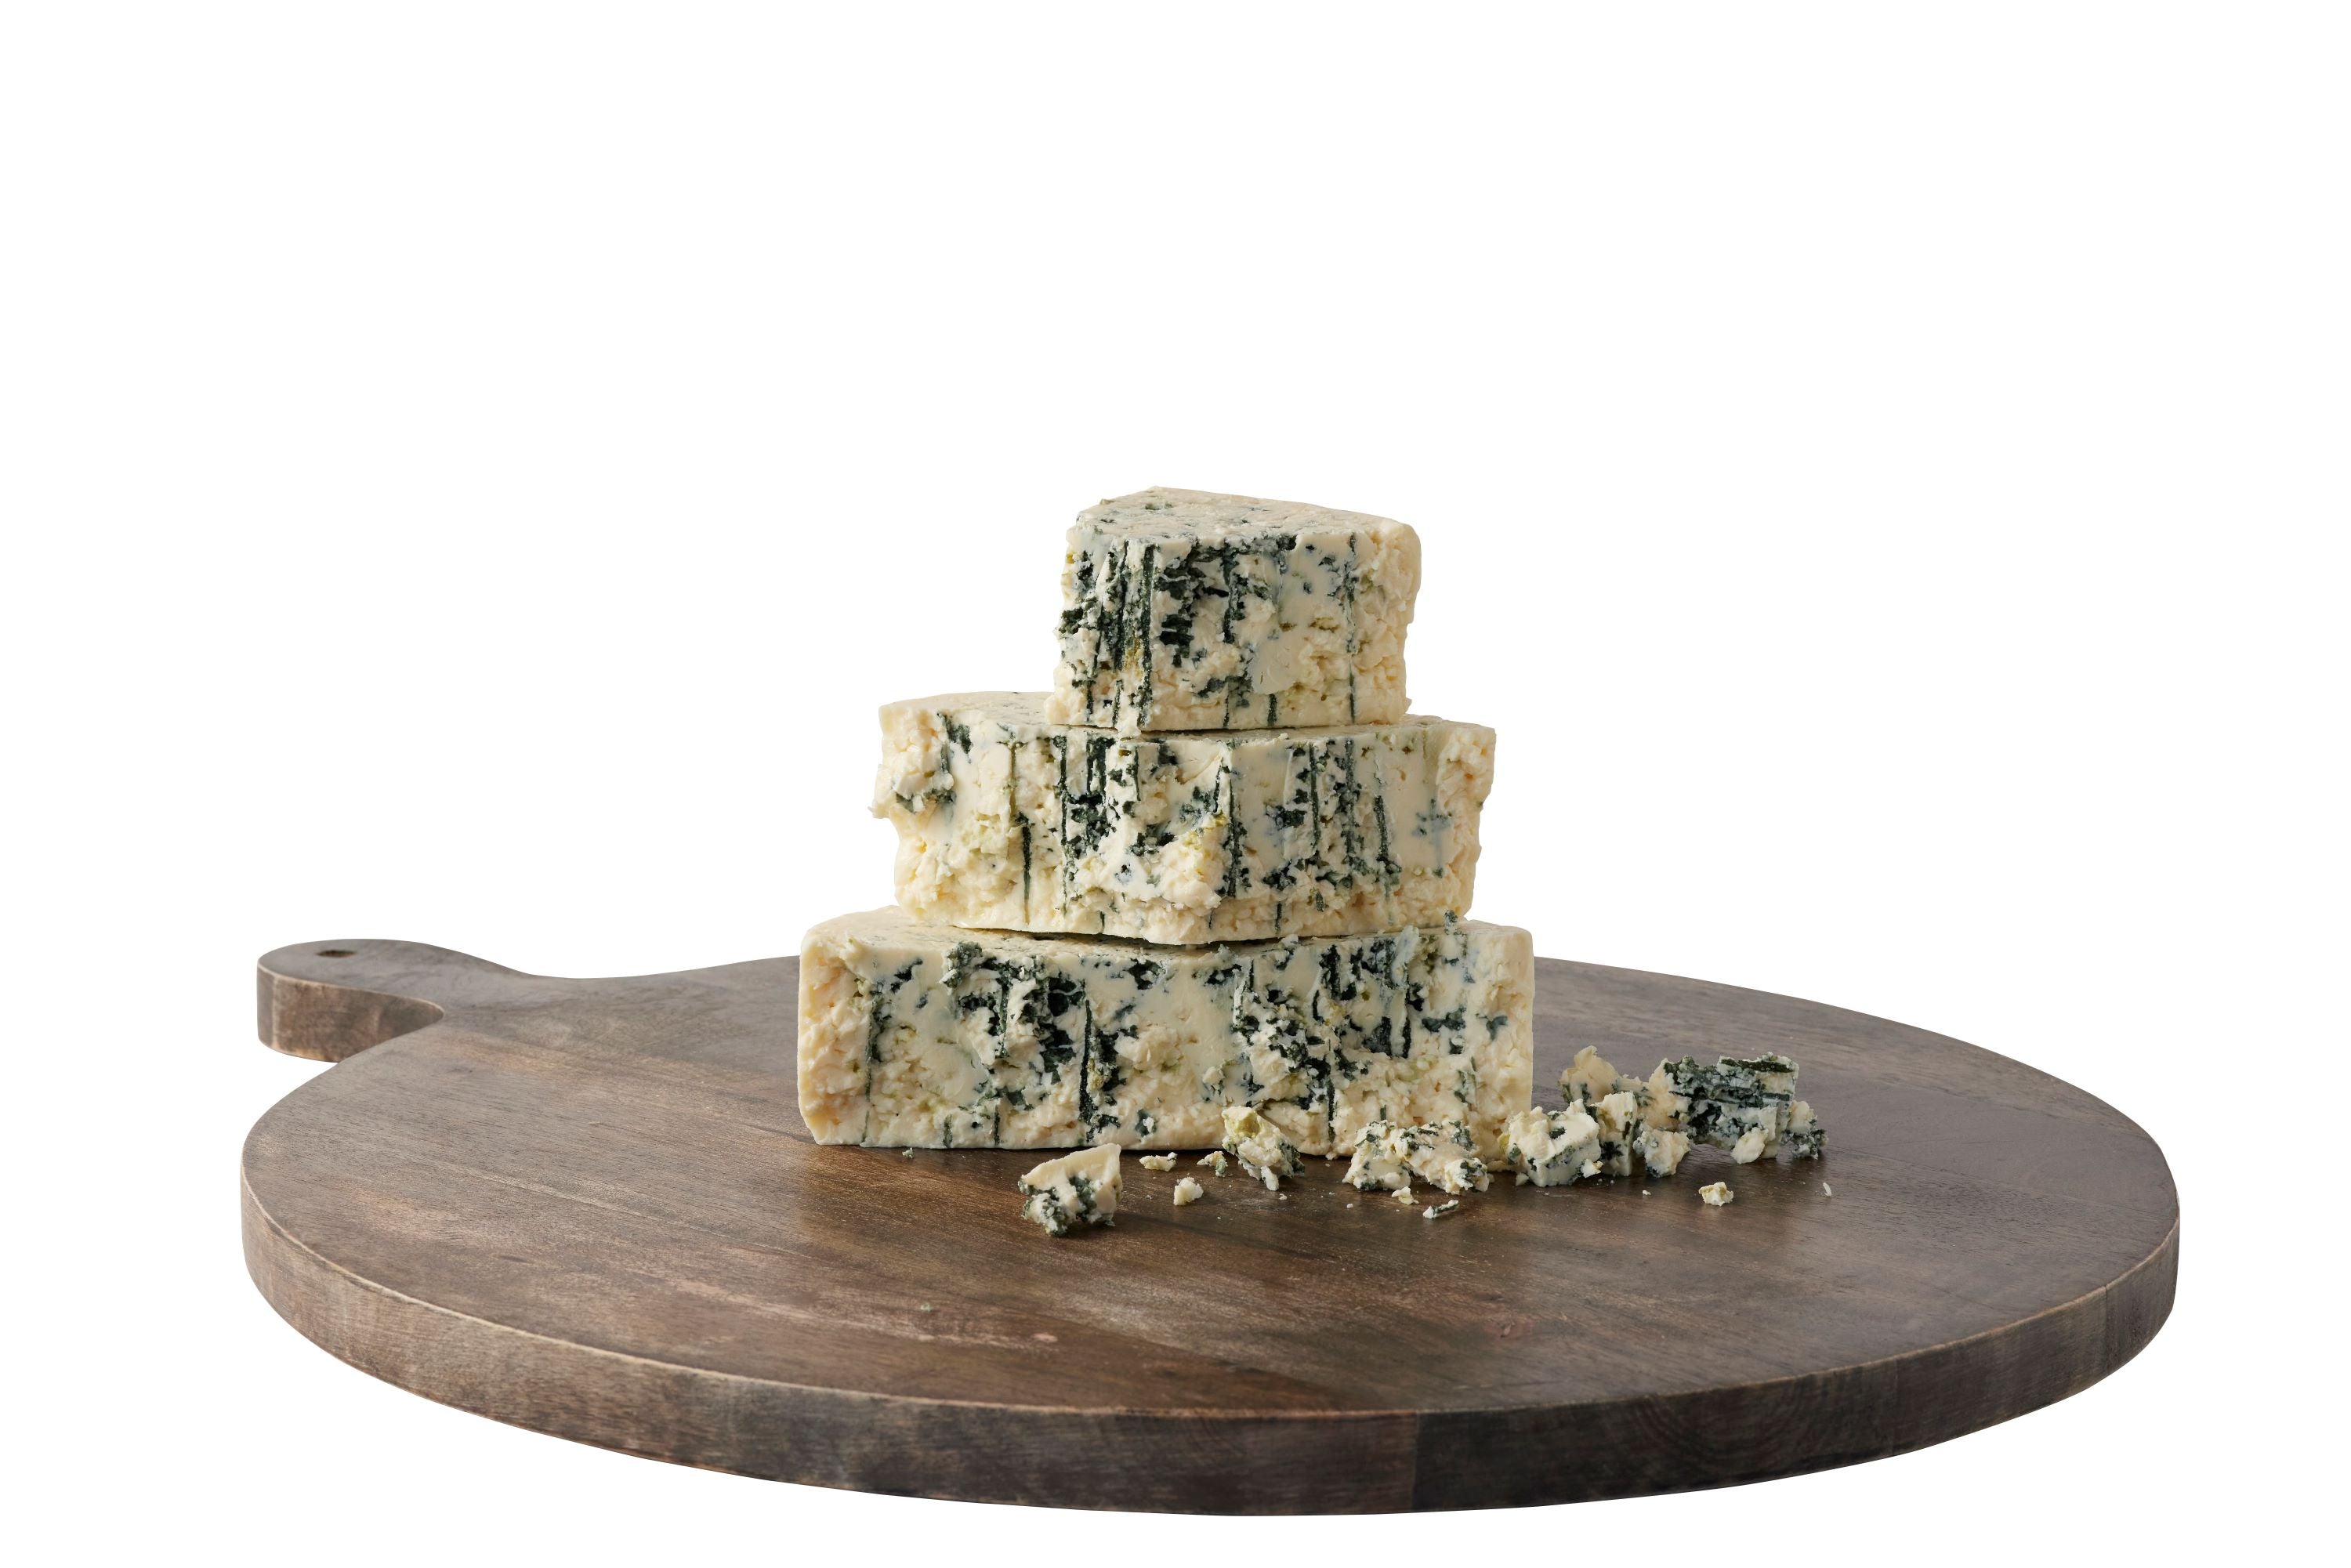 Original Blue Cheese – Point Reyes Farmstead Cheese Company